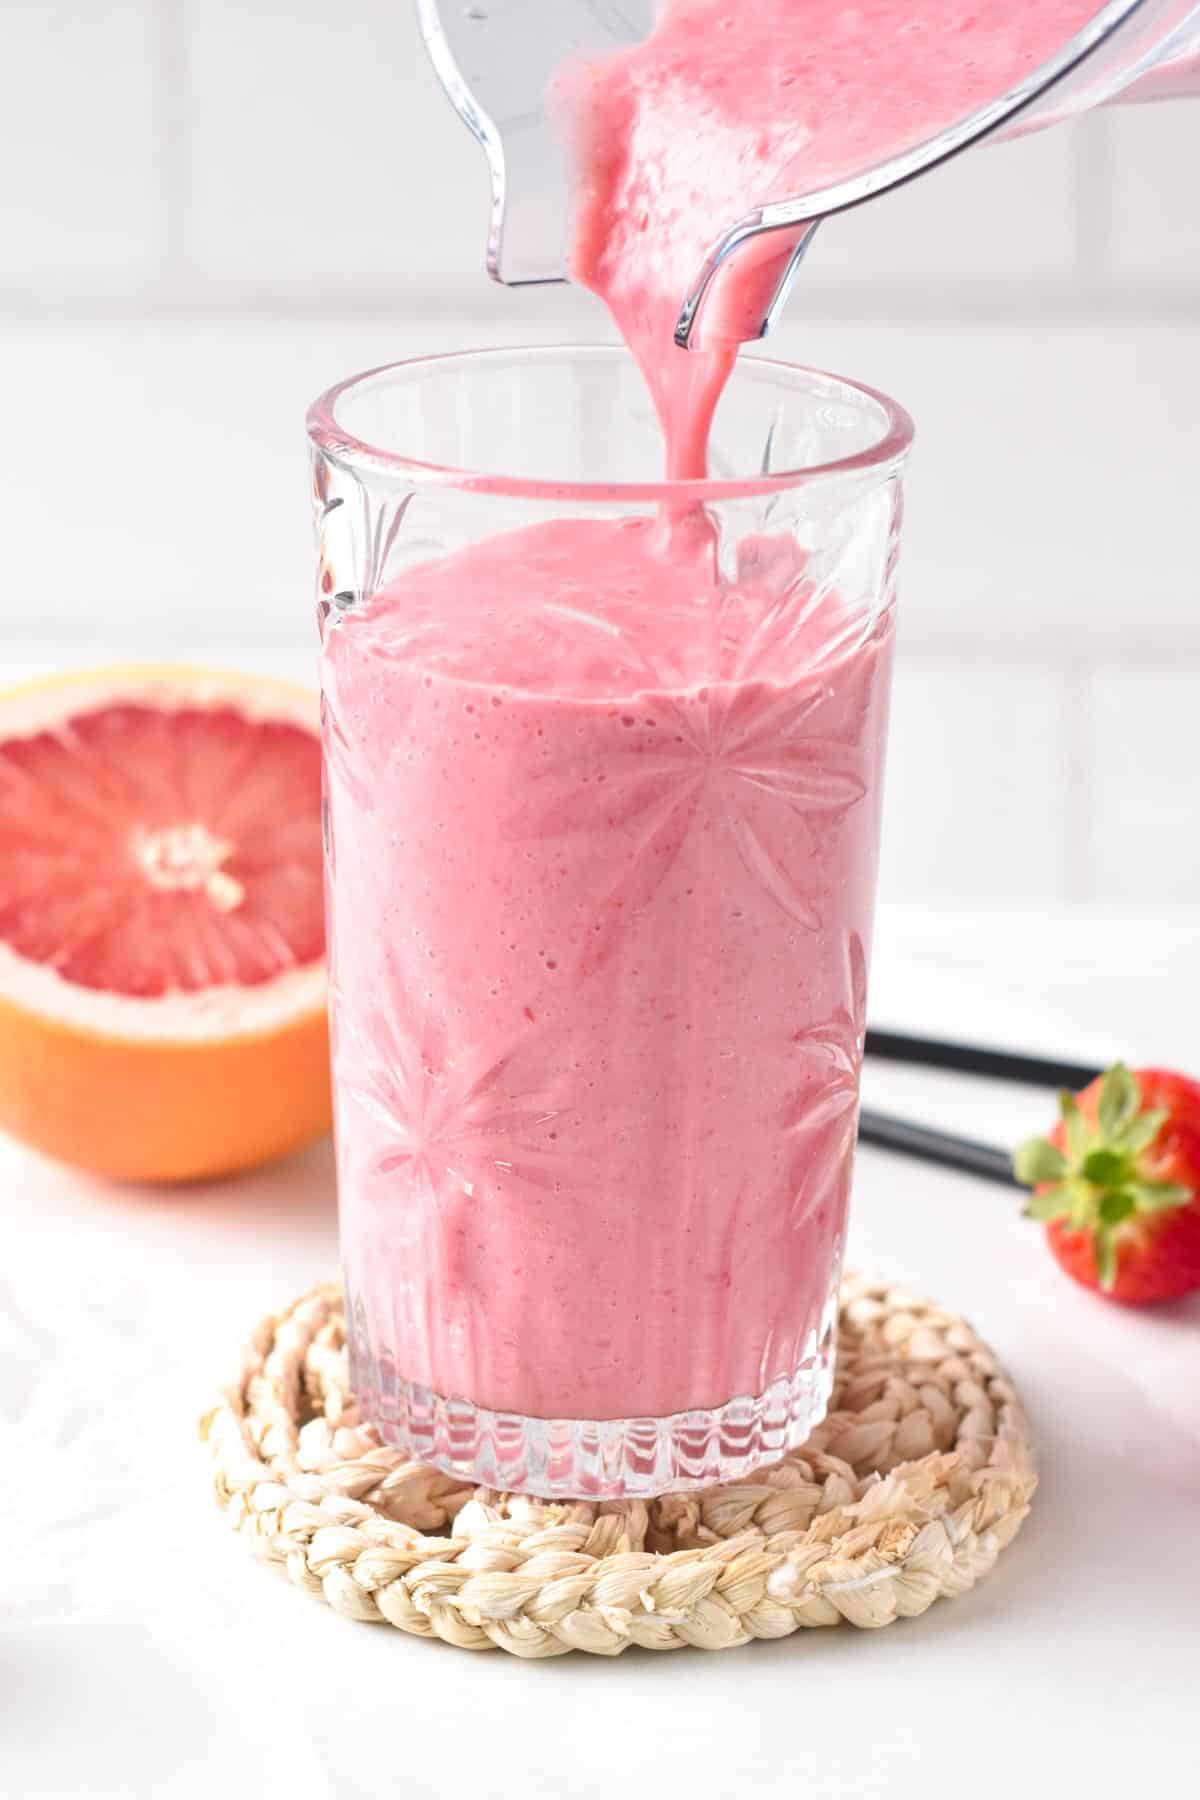 This Grapefruit smoothie is a refreshing sweet and sour pink smoothie recipe packed with vitamin C and antioxidants.